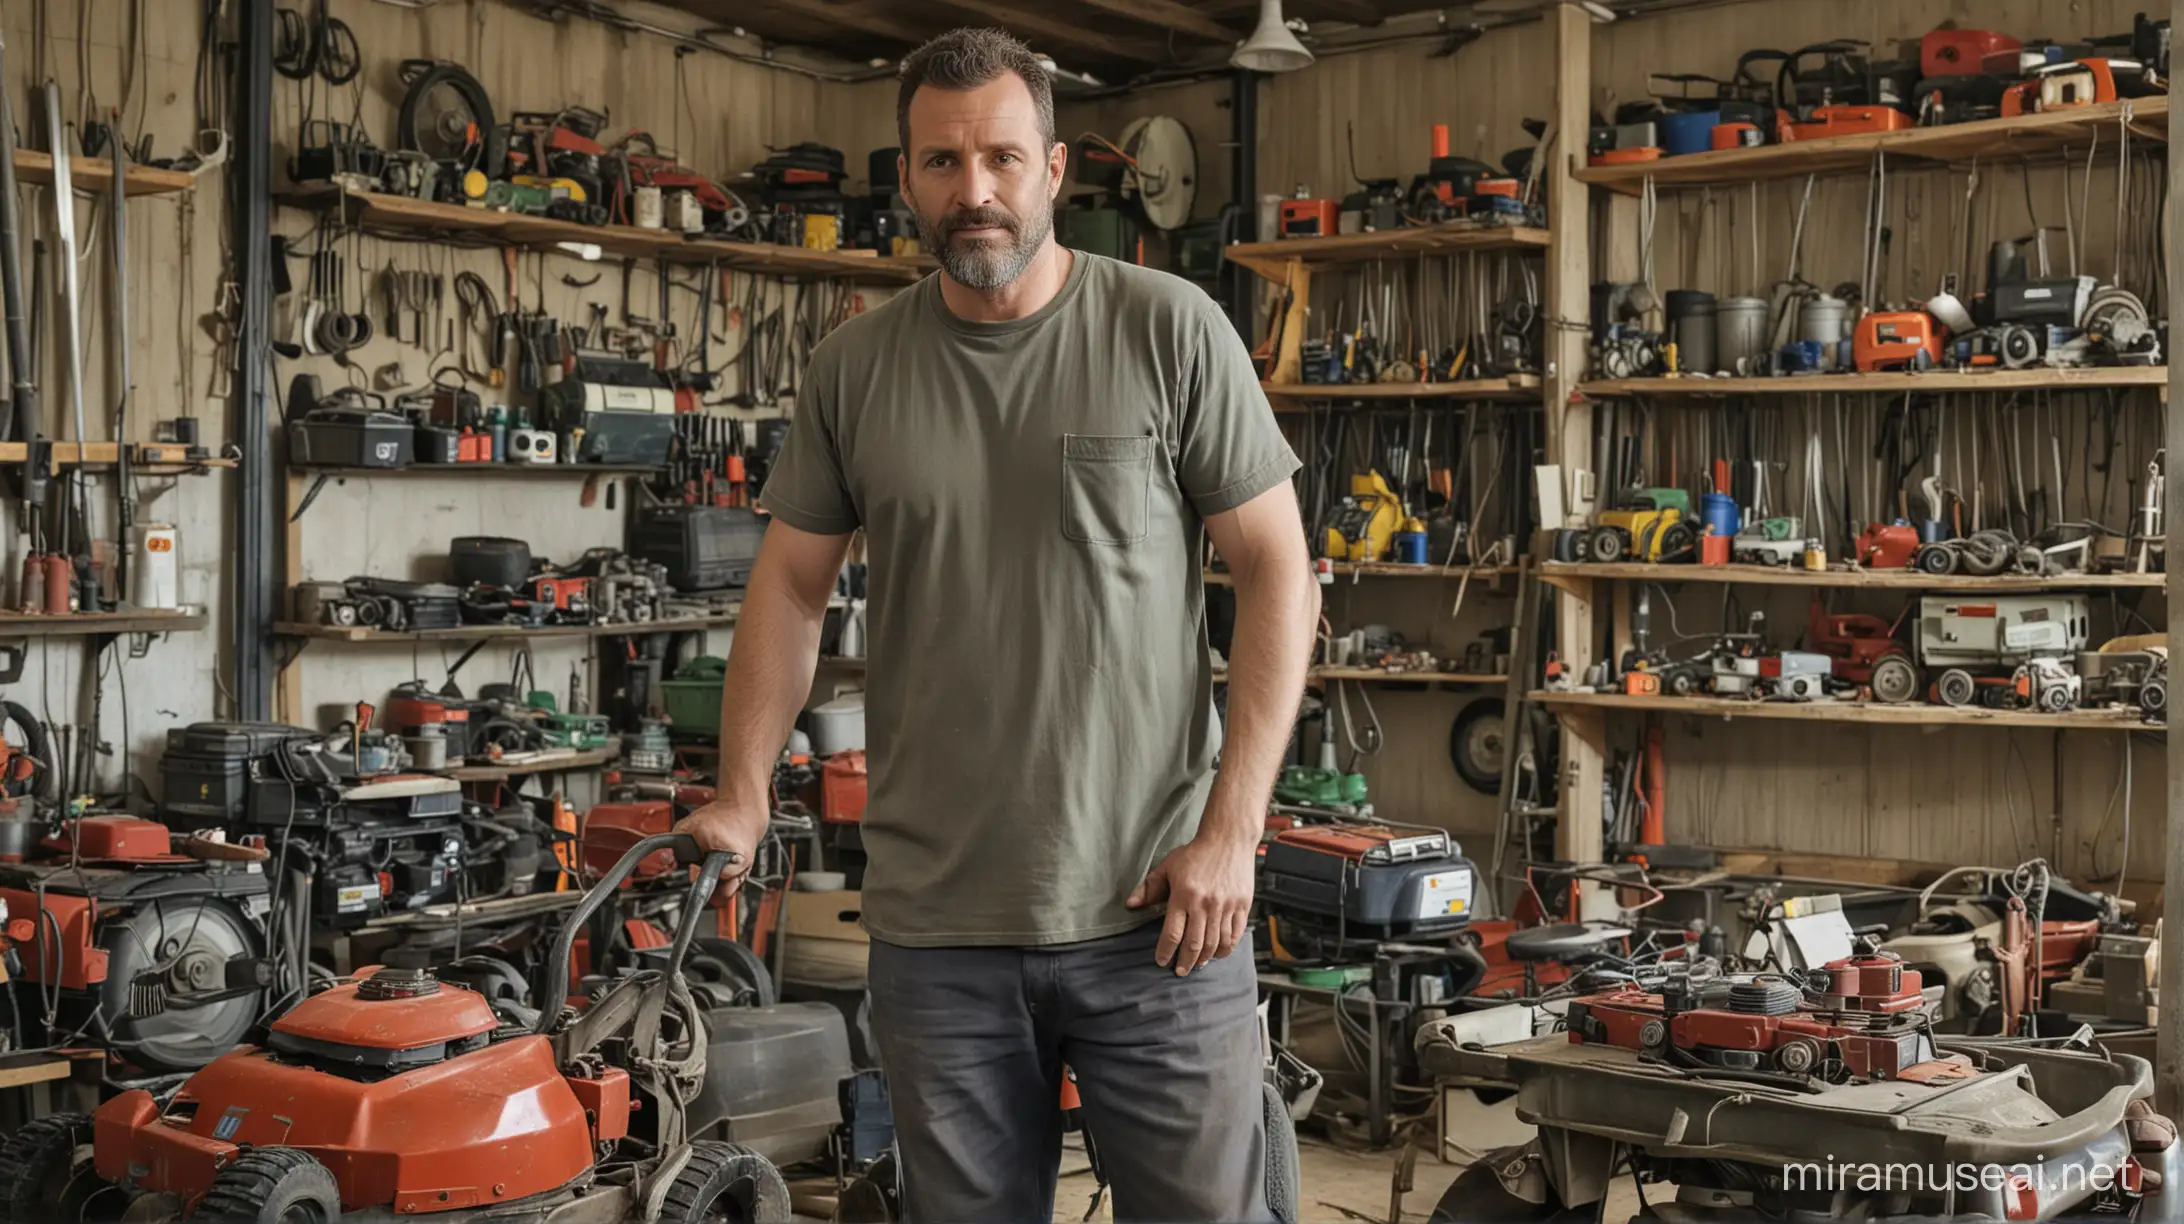 Create a 40-year old man, standing in a workshop where he repairs lawn mowers and sells spare parts.